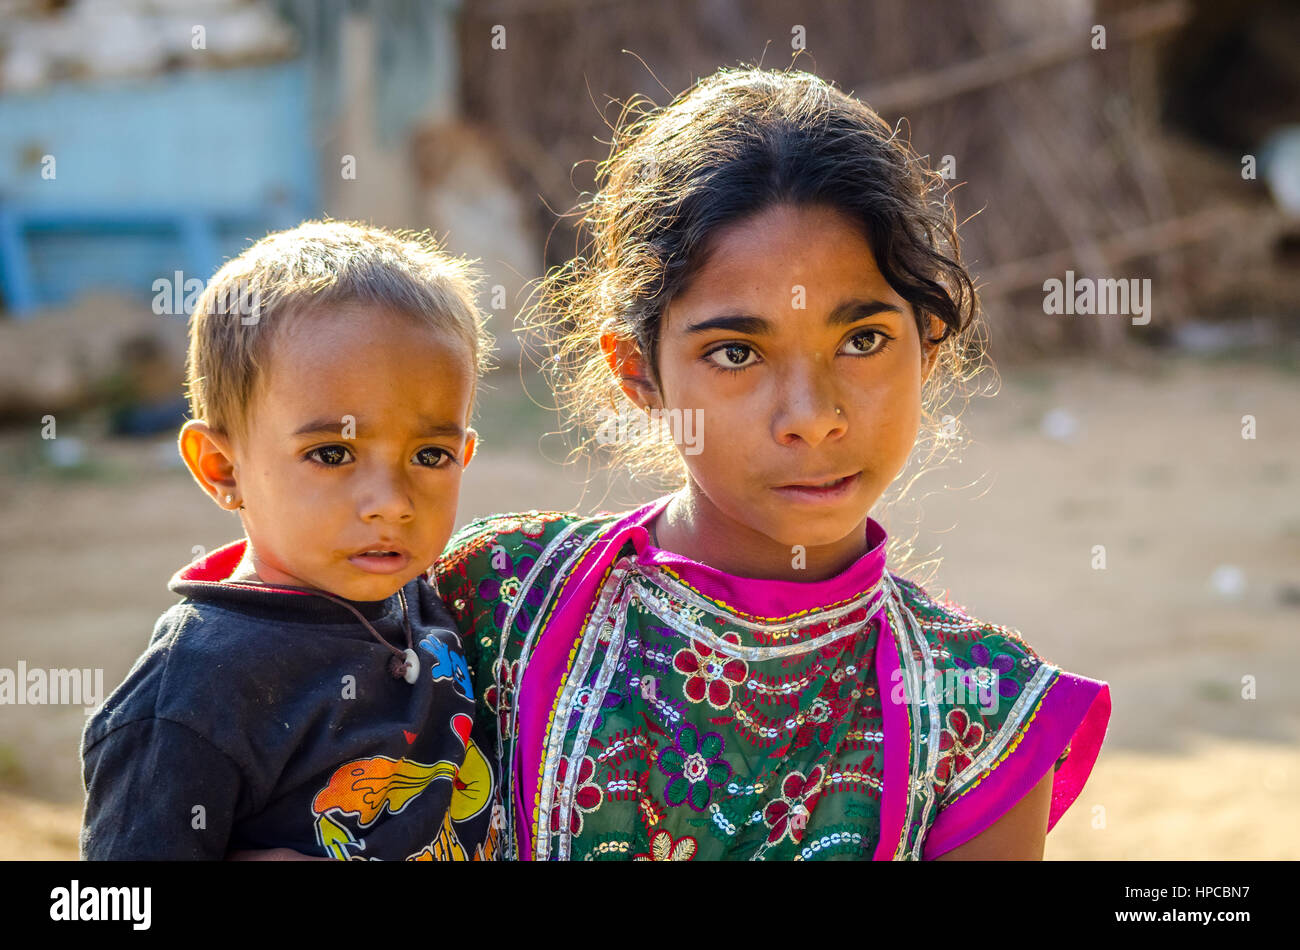 RAJASTHAN, INDIA - NOVEMBER 20, 2016: Unidentified Rajasthani poor young girl holding her brother. Stock Photo